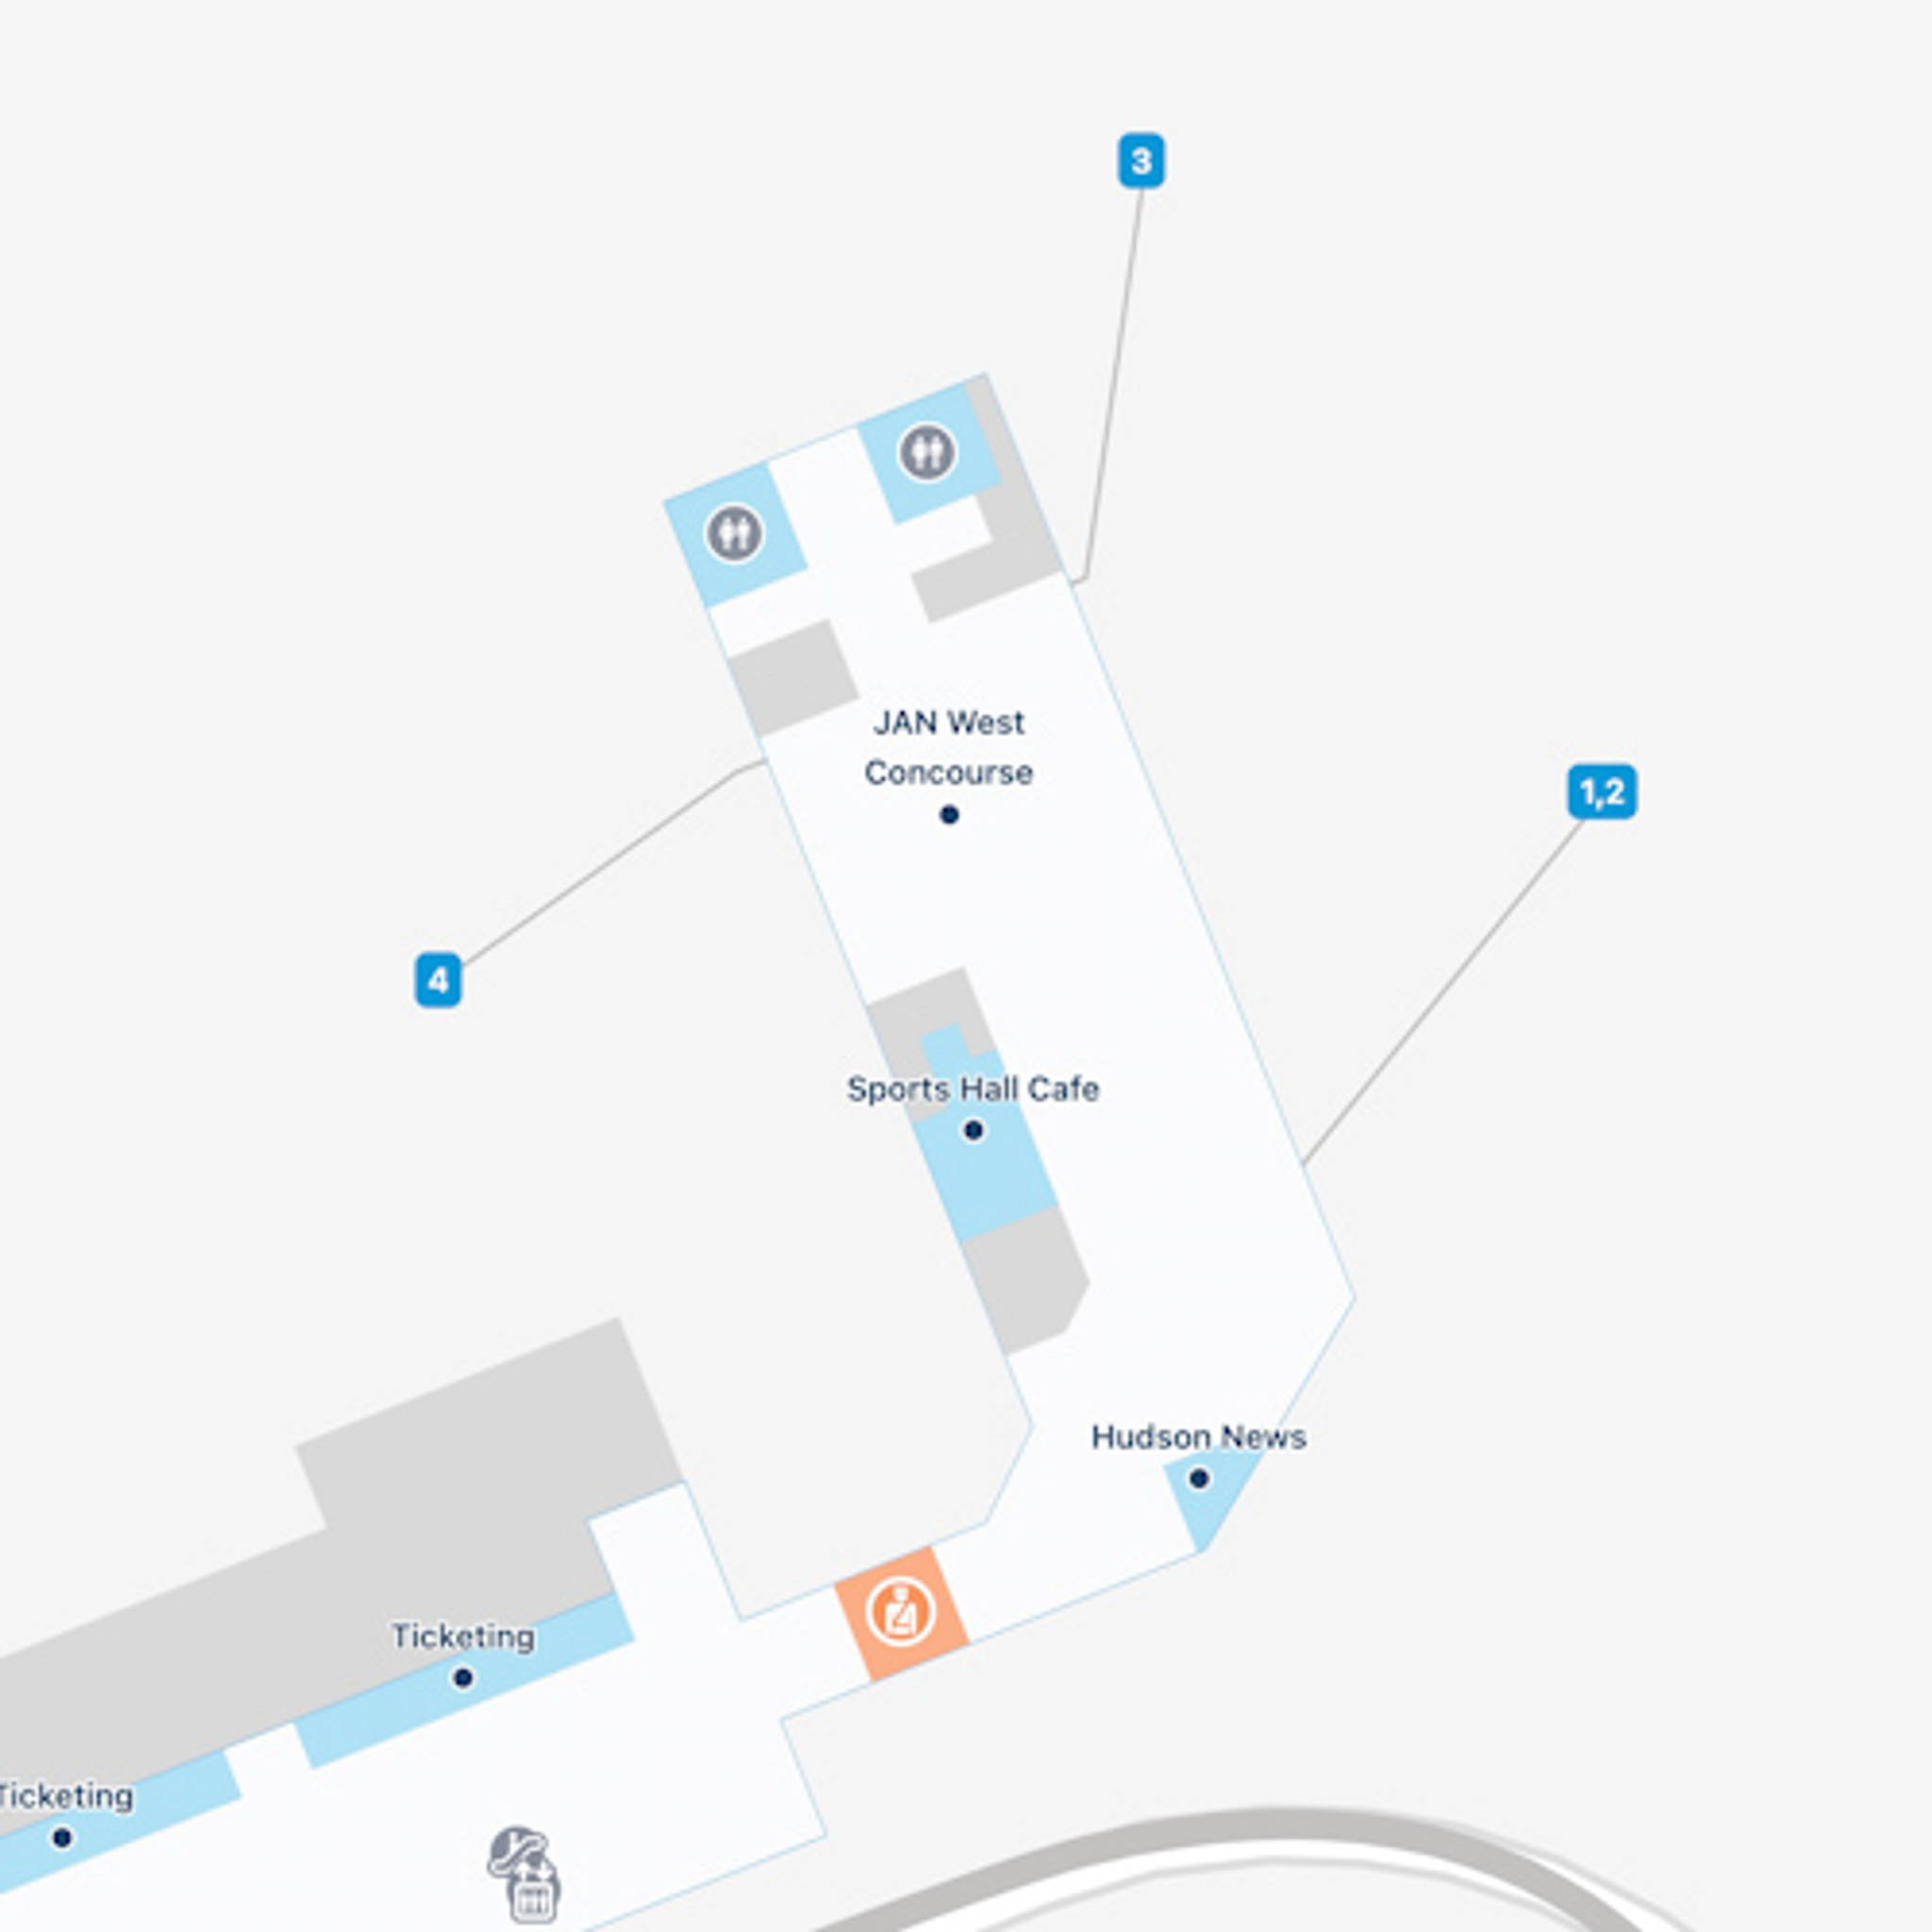 Jackson Evers Airport JAN East Concourse Map